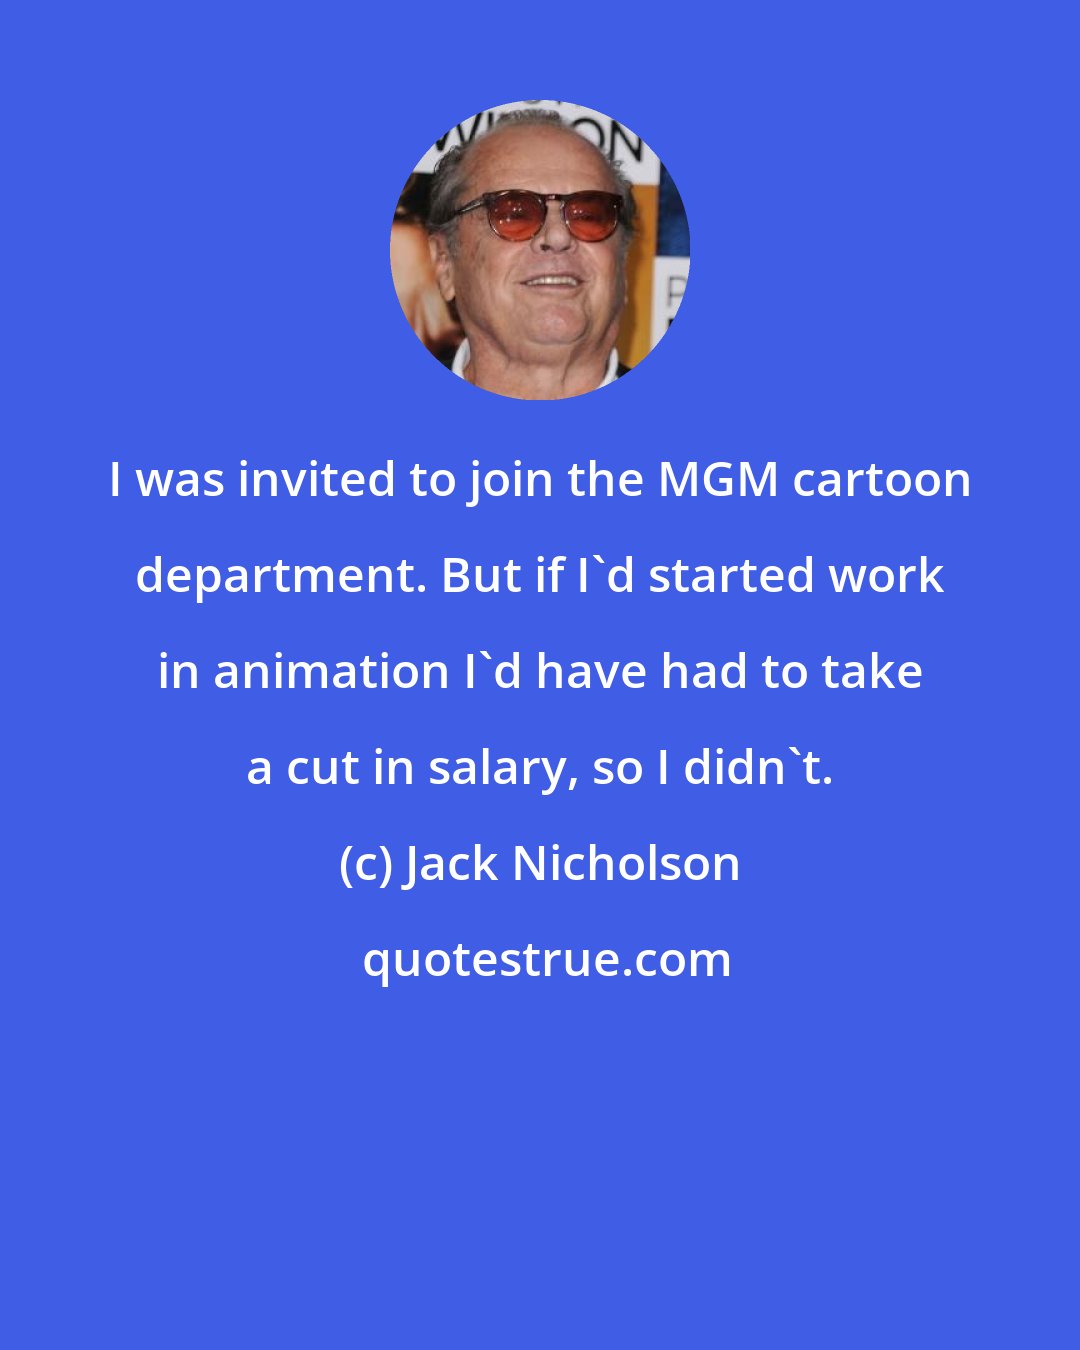 Jack Nicholson: I was invited to join the MGM cartoon department. But if I'd started work in animation I'd have had to take a cut in salary, so I didn't.